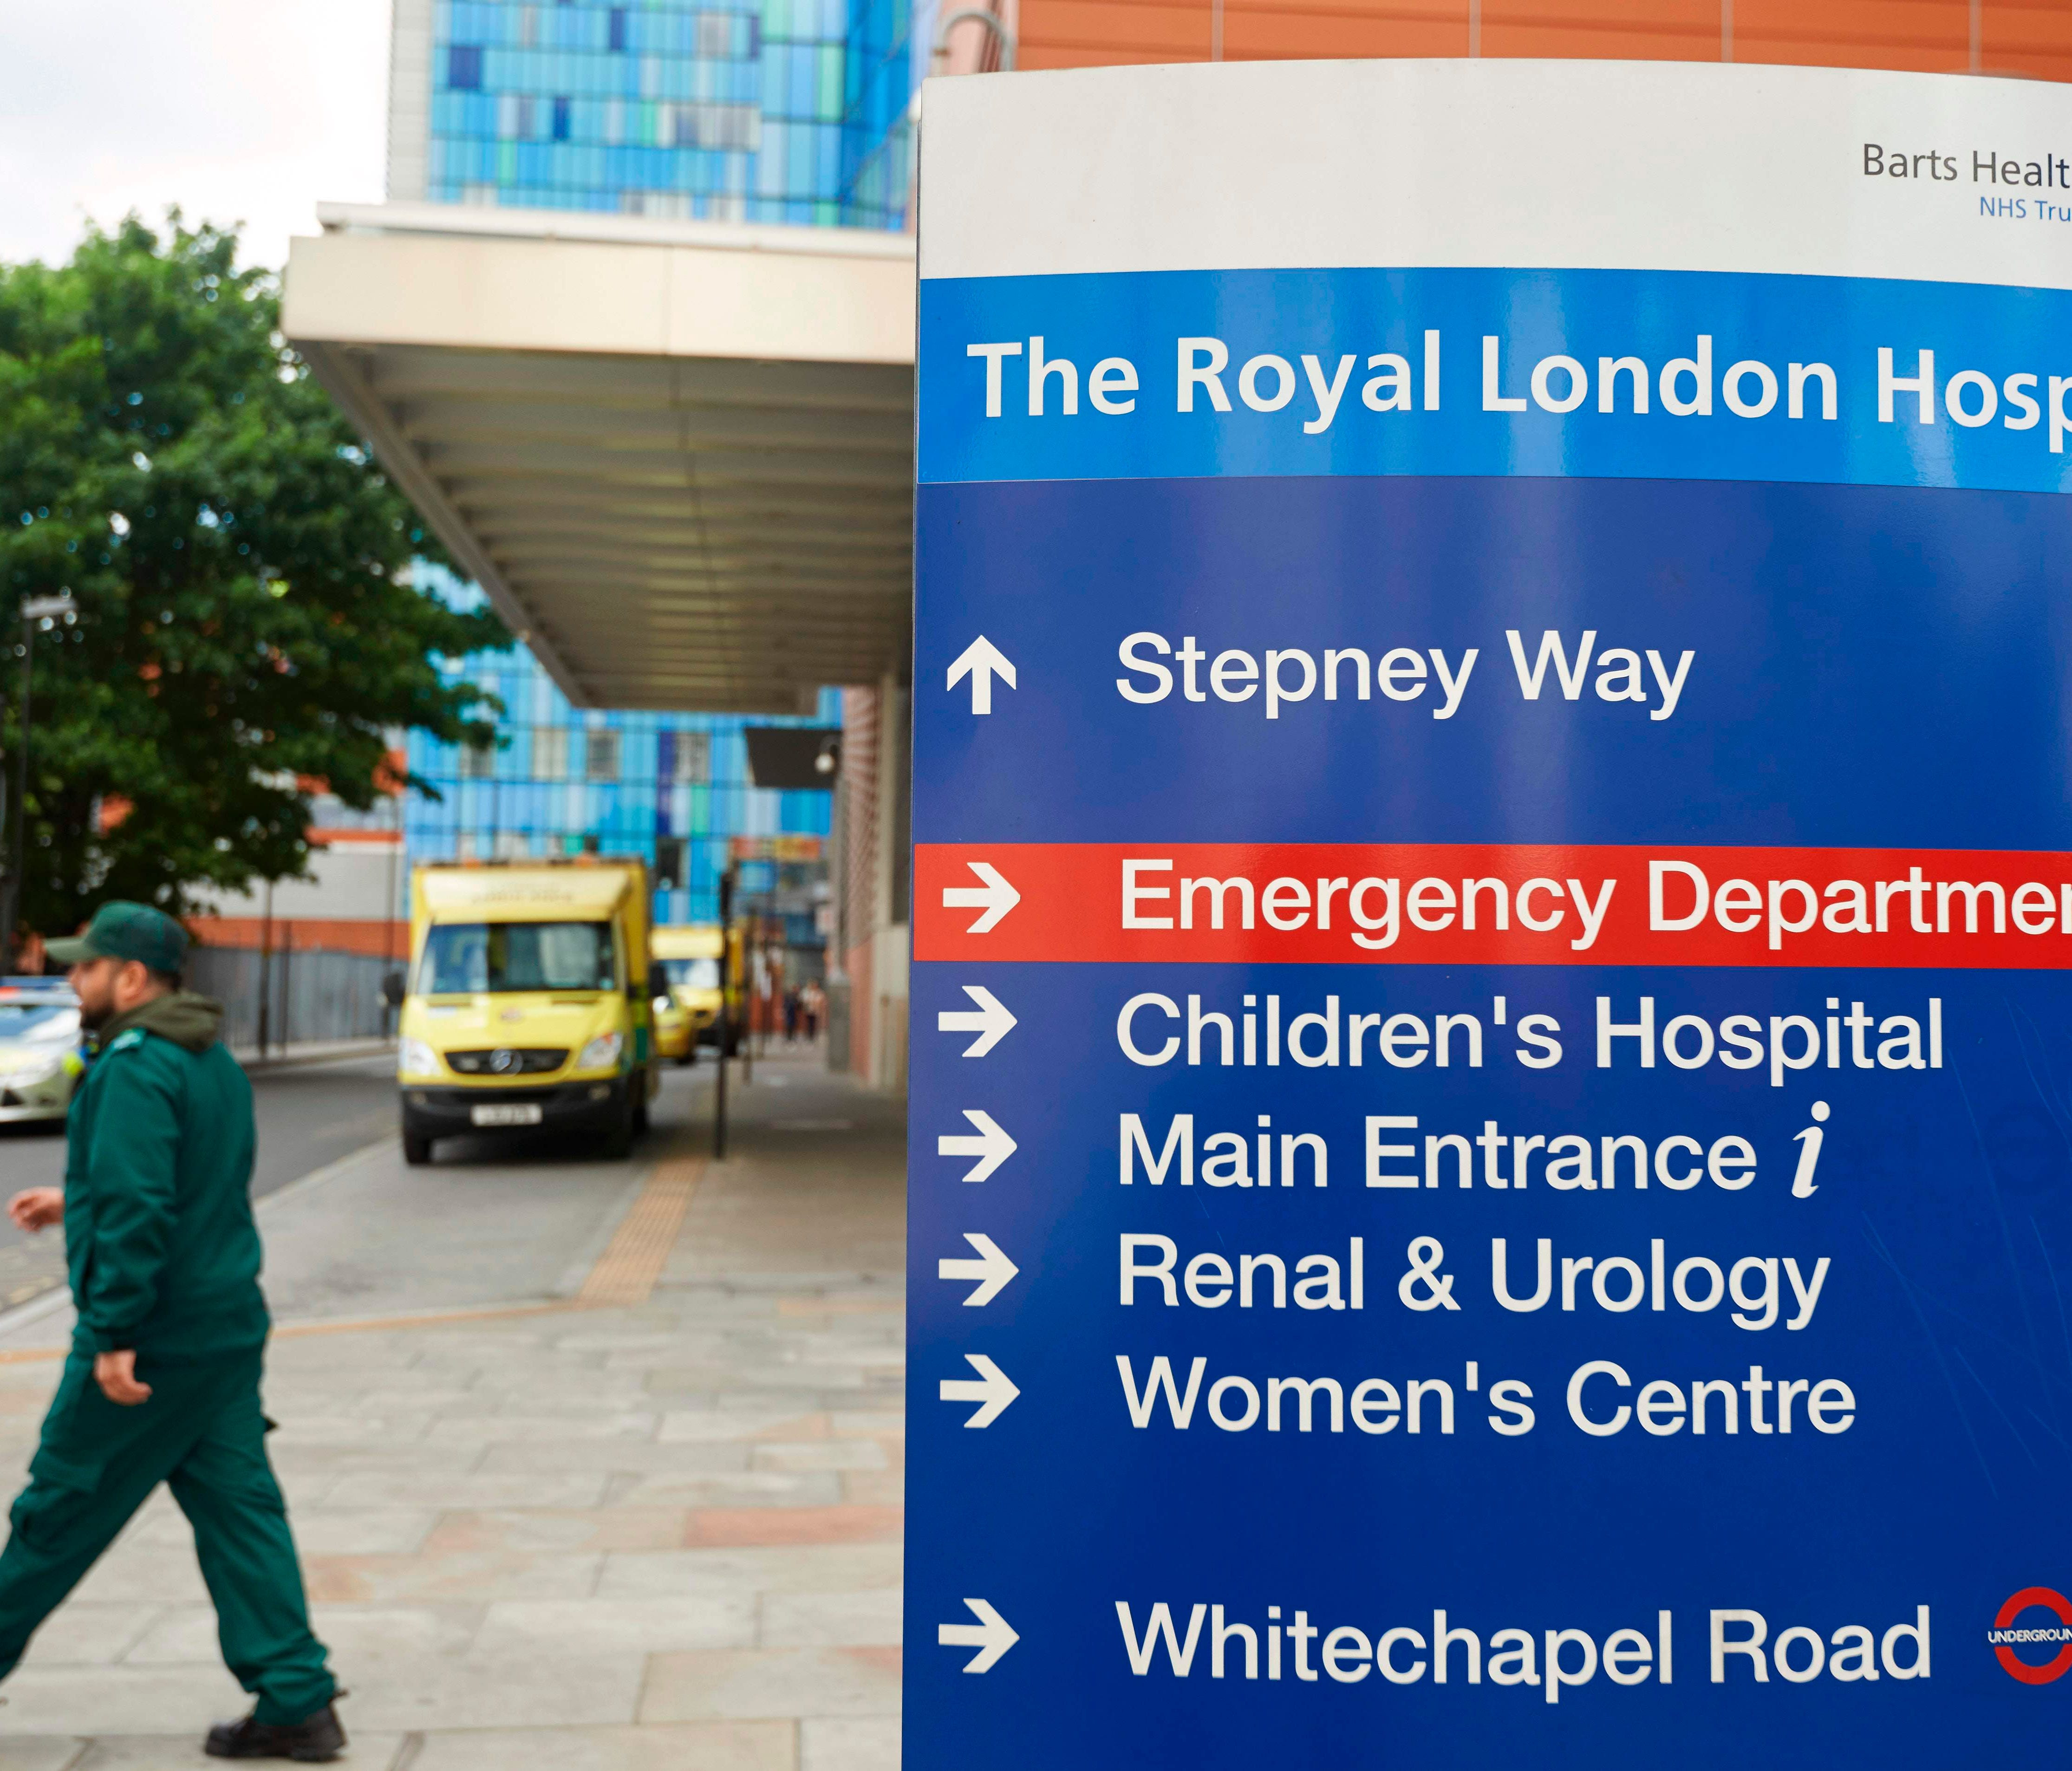 Signage is seen outside The Royal London Hospital in London on May 14, 2017, which was among places hit by a global cyberattack.